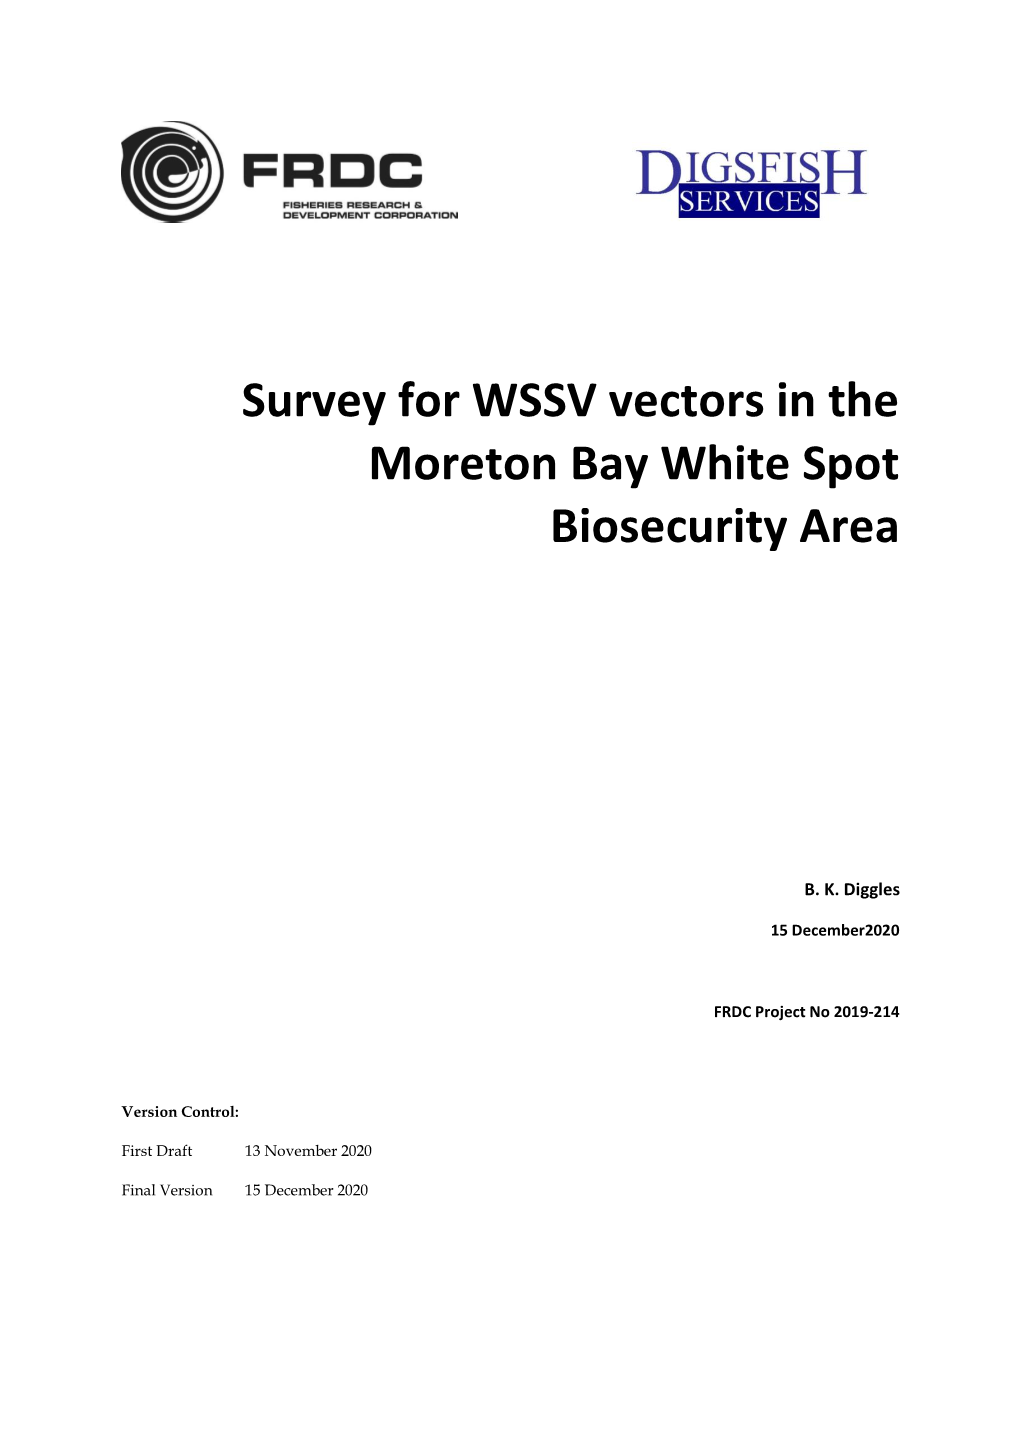 Survey for WSSV Vectors in the Moreton Bay White Spot Biosecurity Area